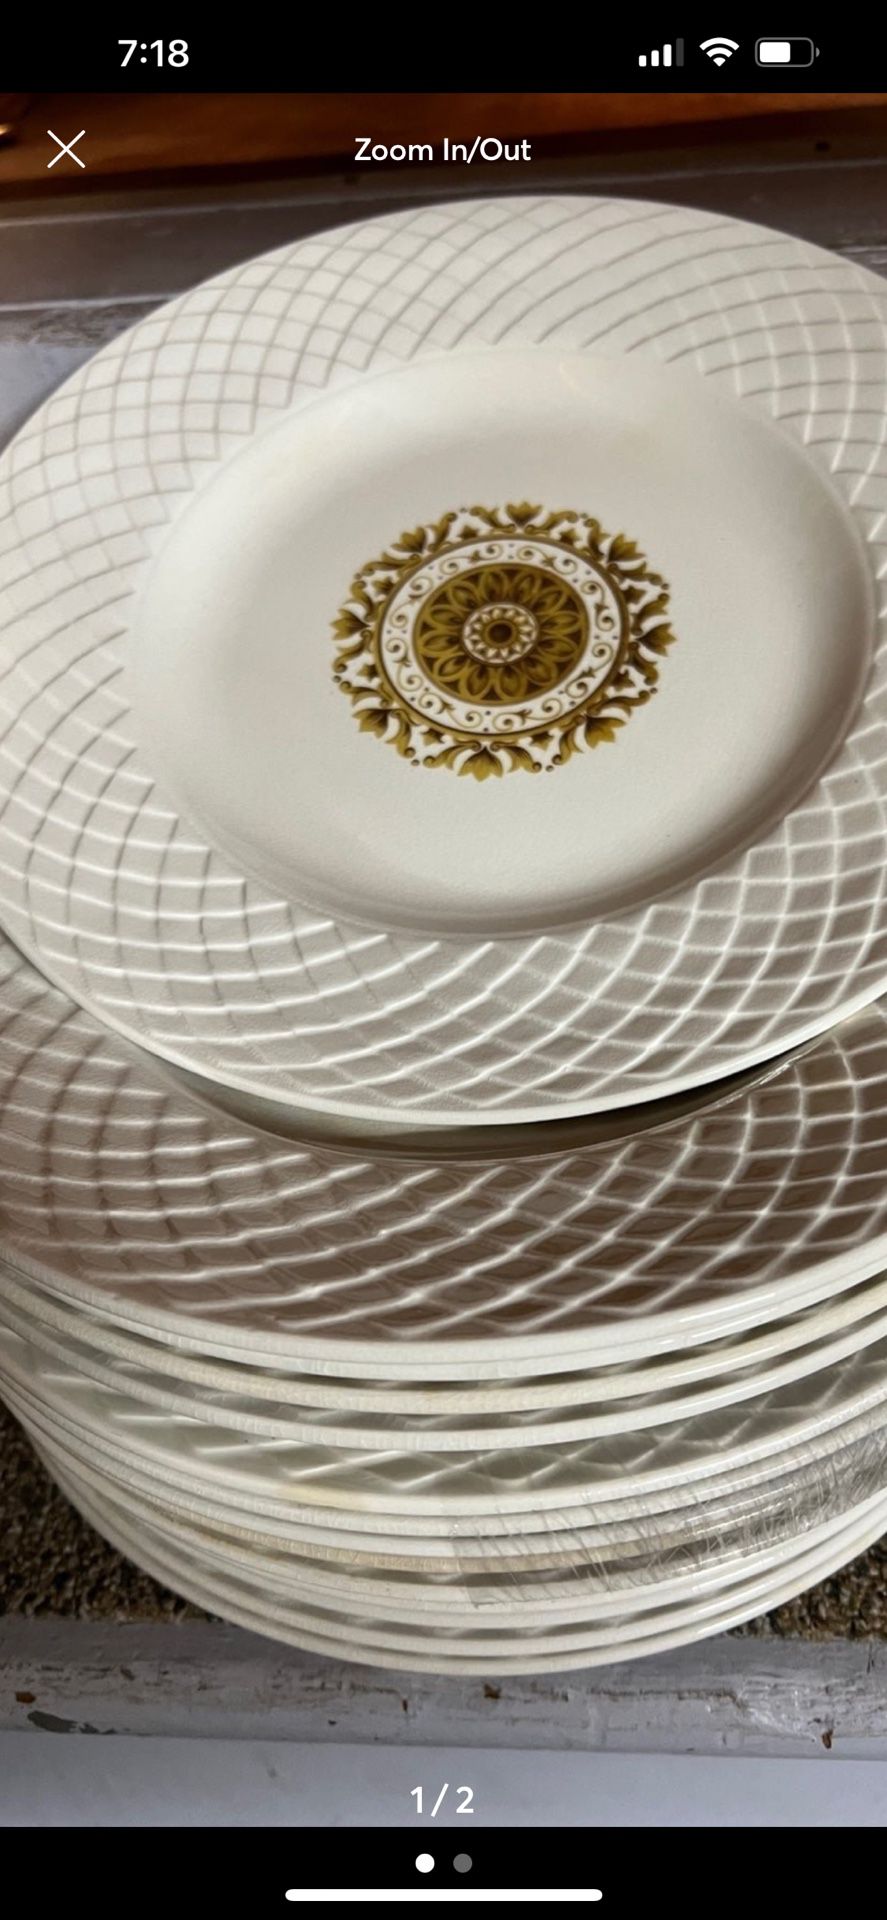 (15) Wedgewood Gold Medallion Plates 10 Inch